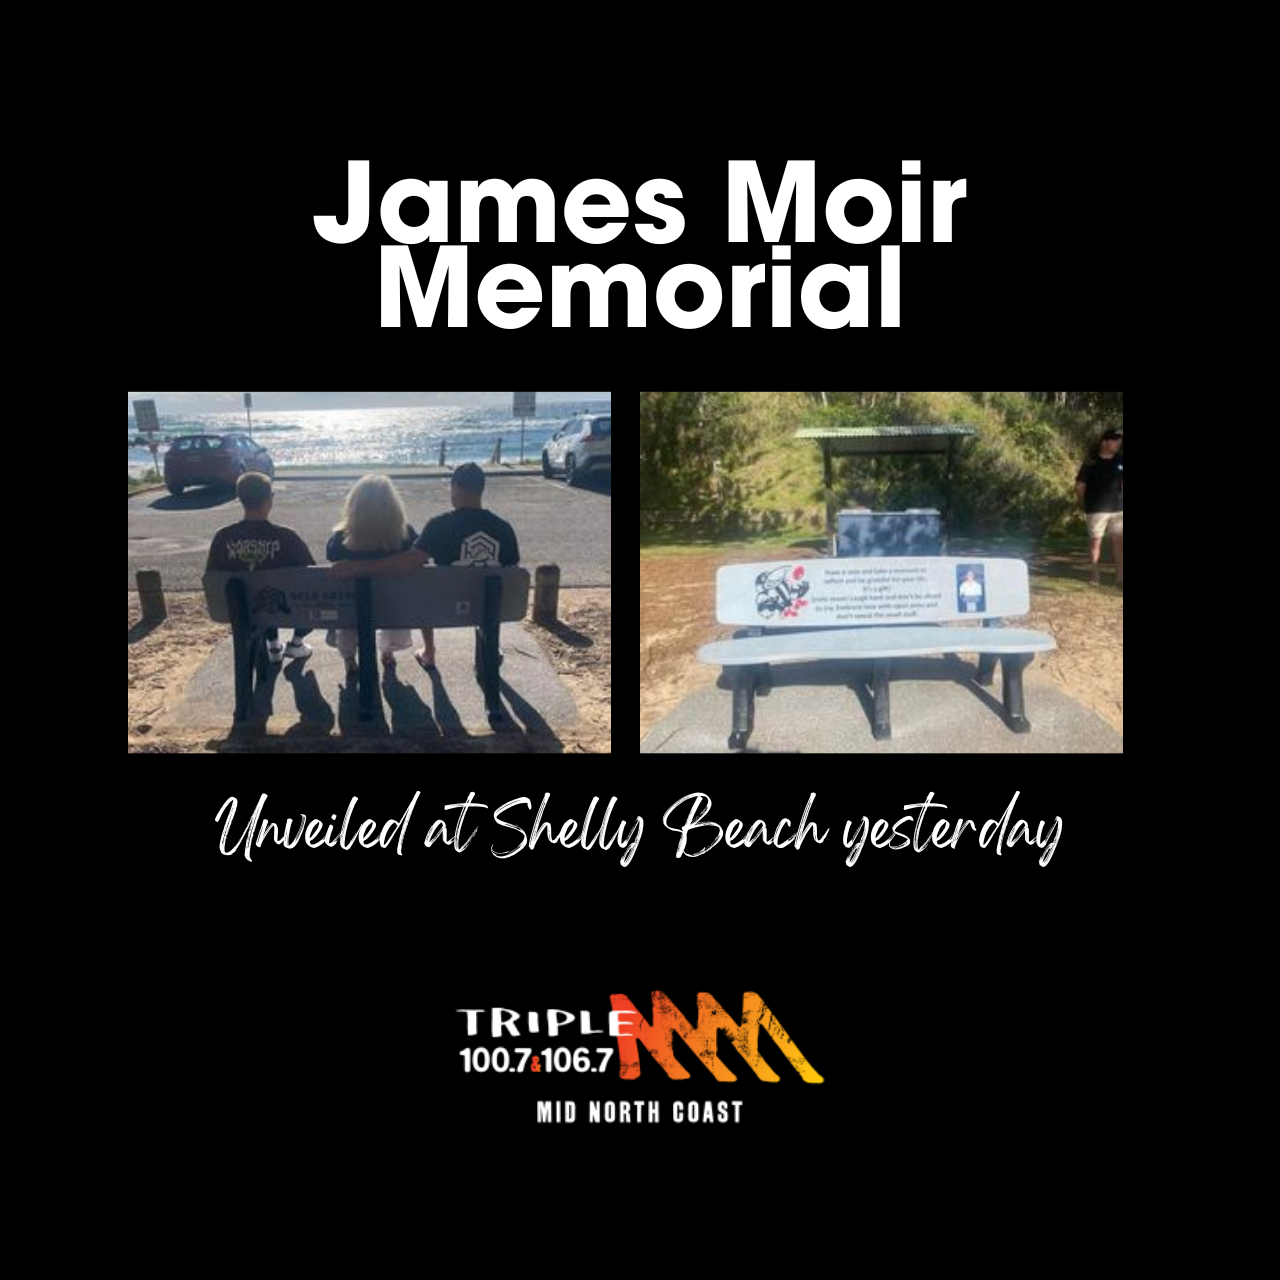 Strawny catches up with Leanne Moir after the unveiling of a new memorial at Shelly Beach for son James